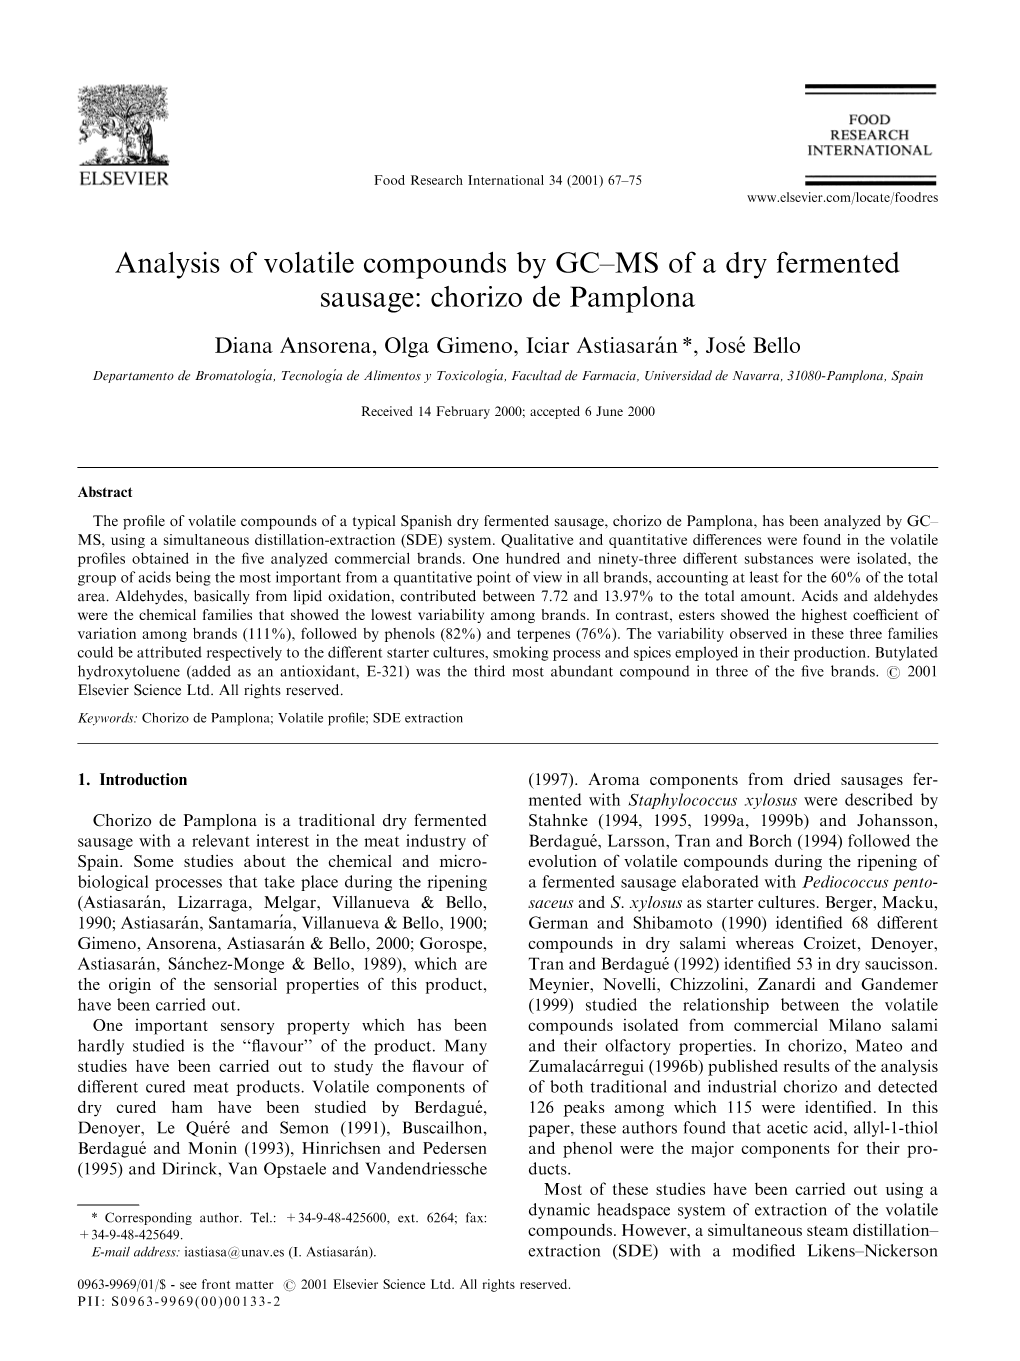 Analysis of Volatile Compounds by GC±MS of a Dry Fermented Sausage: Chorizo De Pamplona